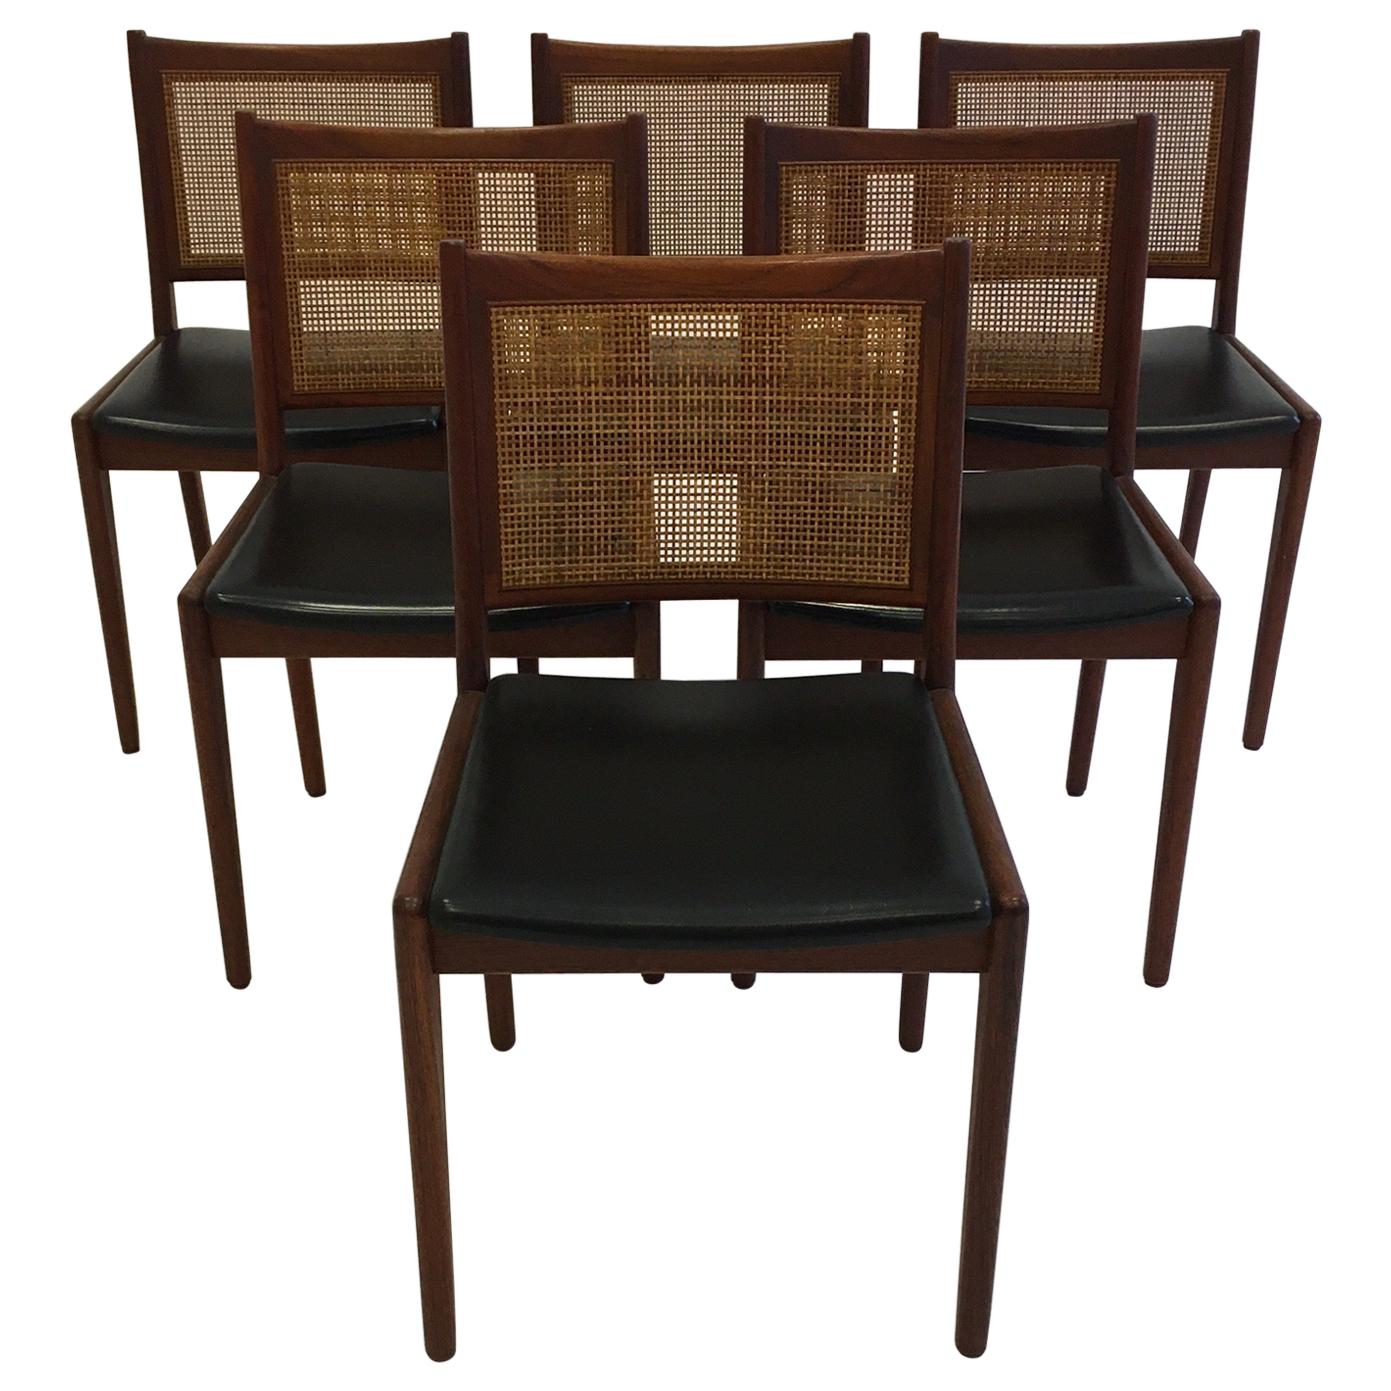 Karl-Erik Ekselius Set of Six Dining Chairs in Teak and Cane, Sweden, 1950s